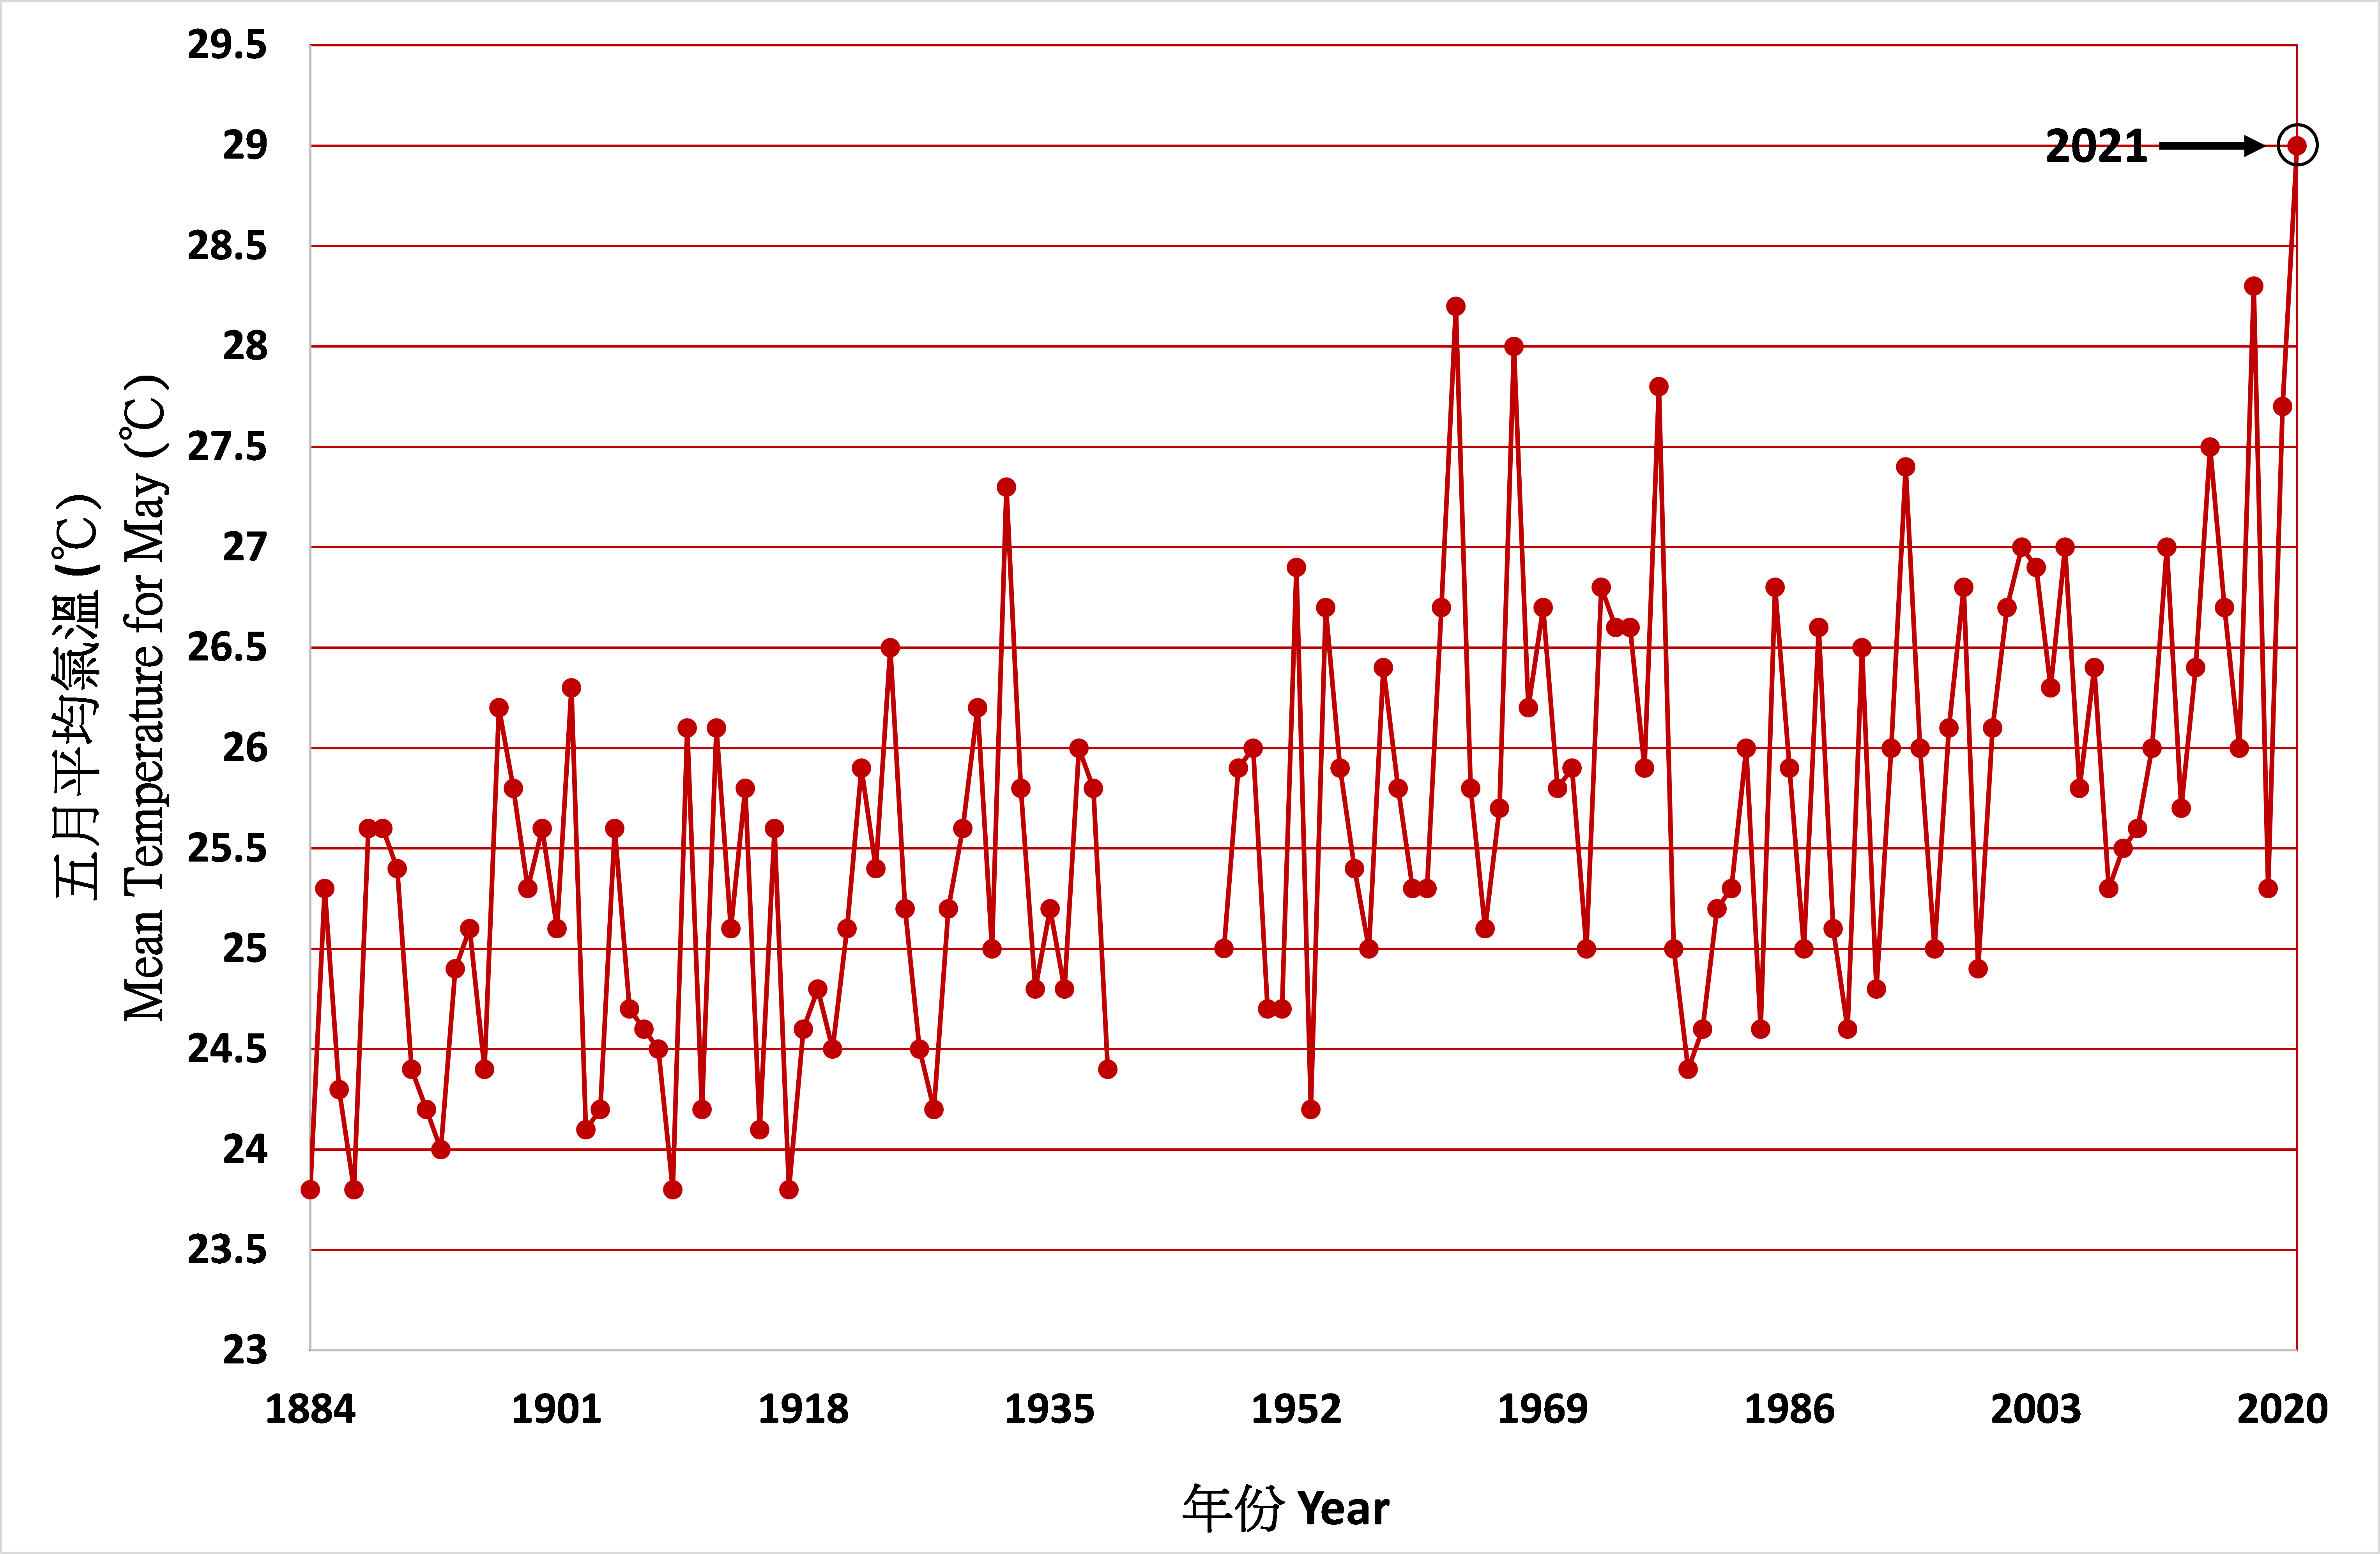 Long-term time series of the mean temperature in May in Hong Kong